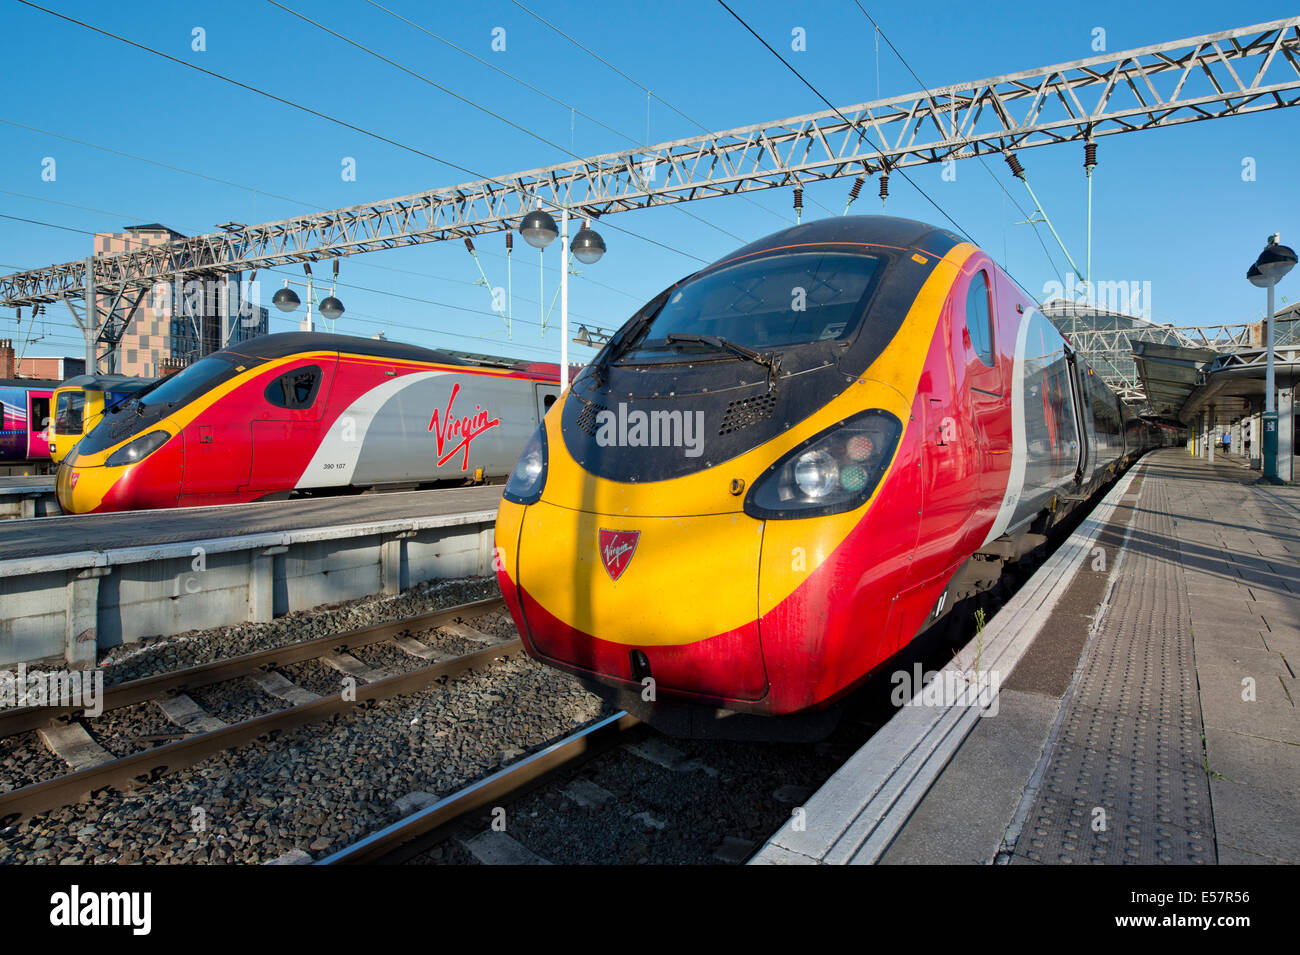 Two Virgin Class 390 Pendolino trains in the platforms of Manchester Piccadilly Rail Station. Stock Photo